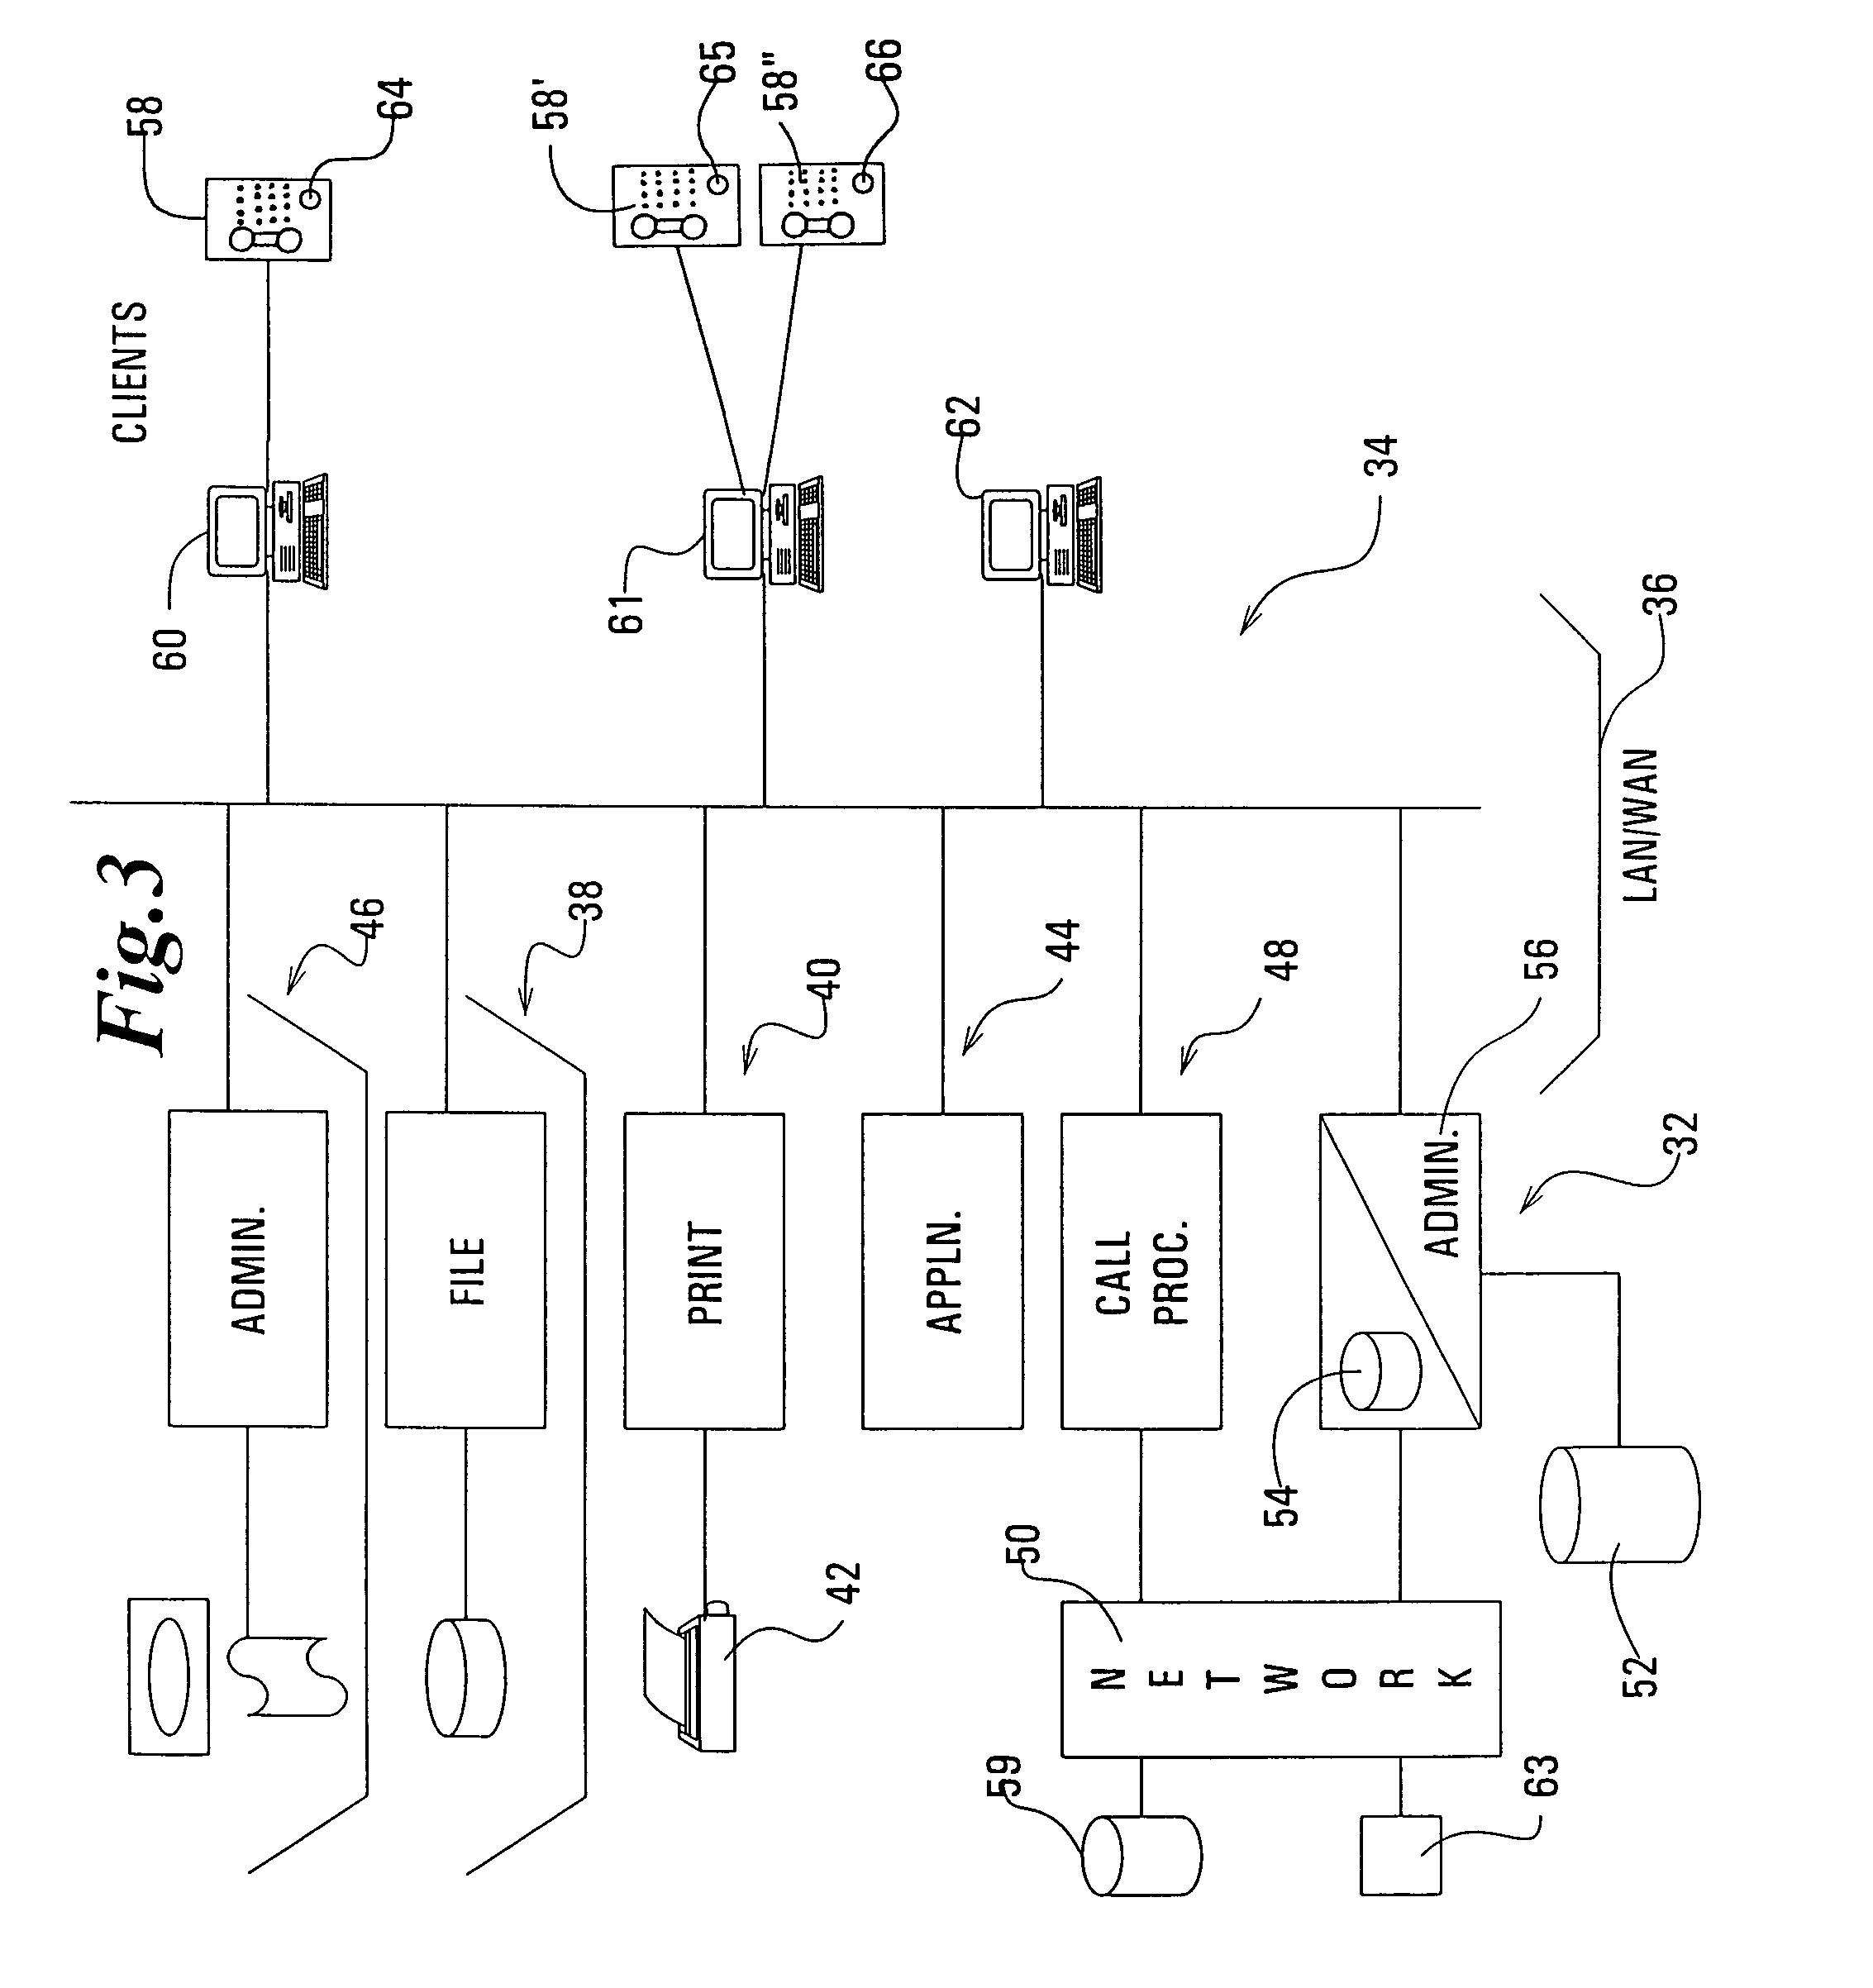 Apparatus for locating a station initiating transmission of an emergency message in a network having multiple transmission sources